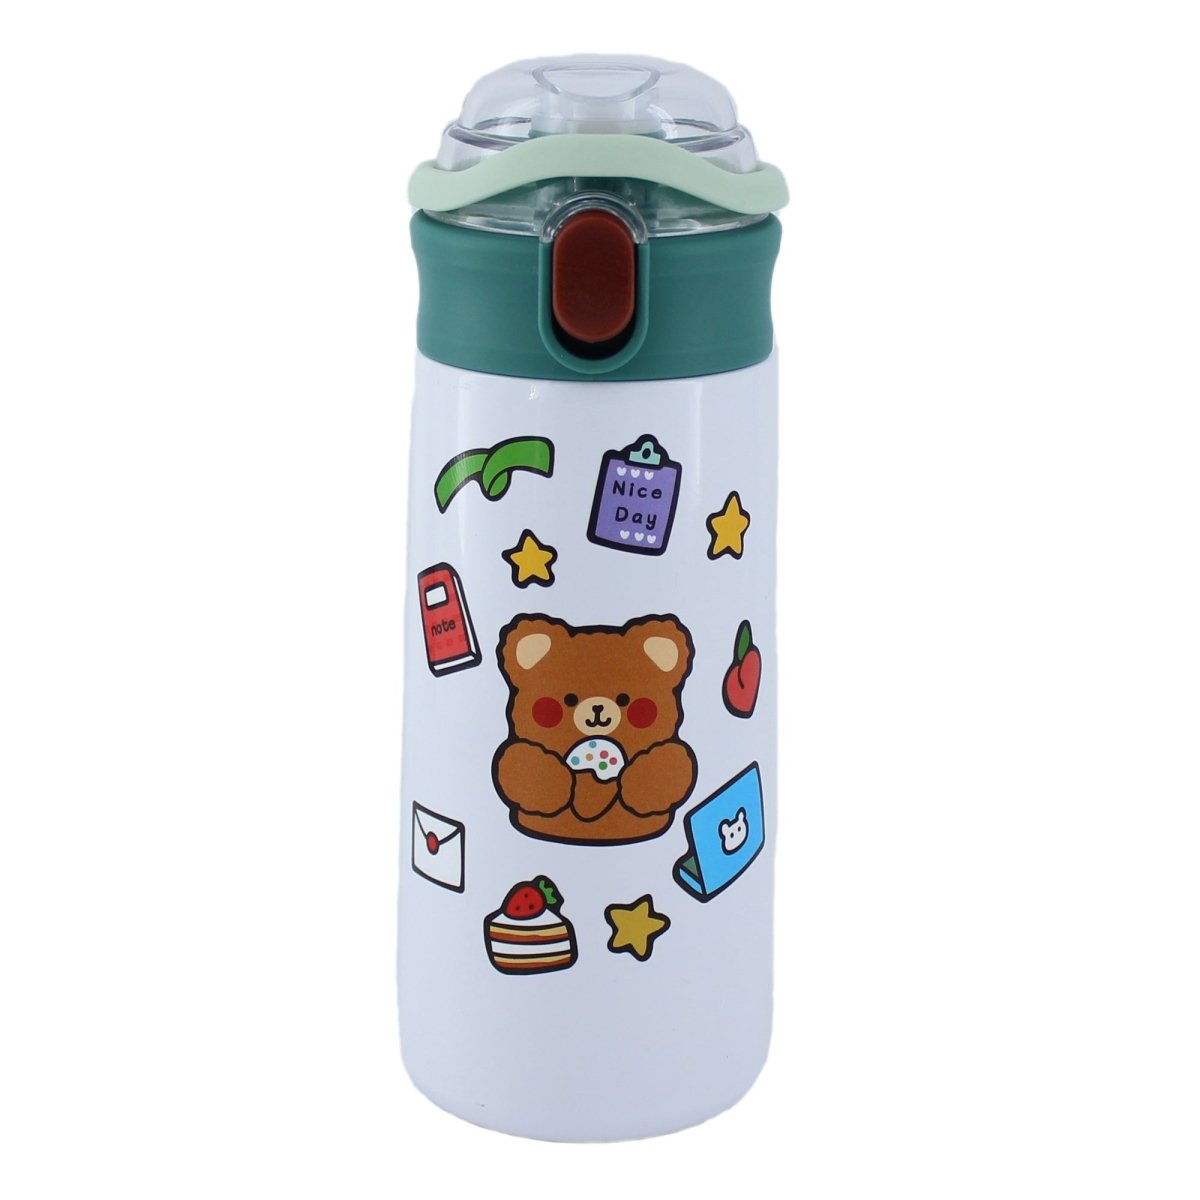 Thermos Stainless Steel Insulated Water Bottle with Straw Stickers 16.9 oz